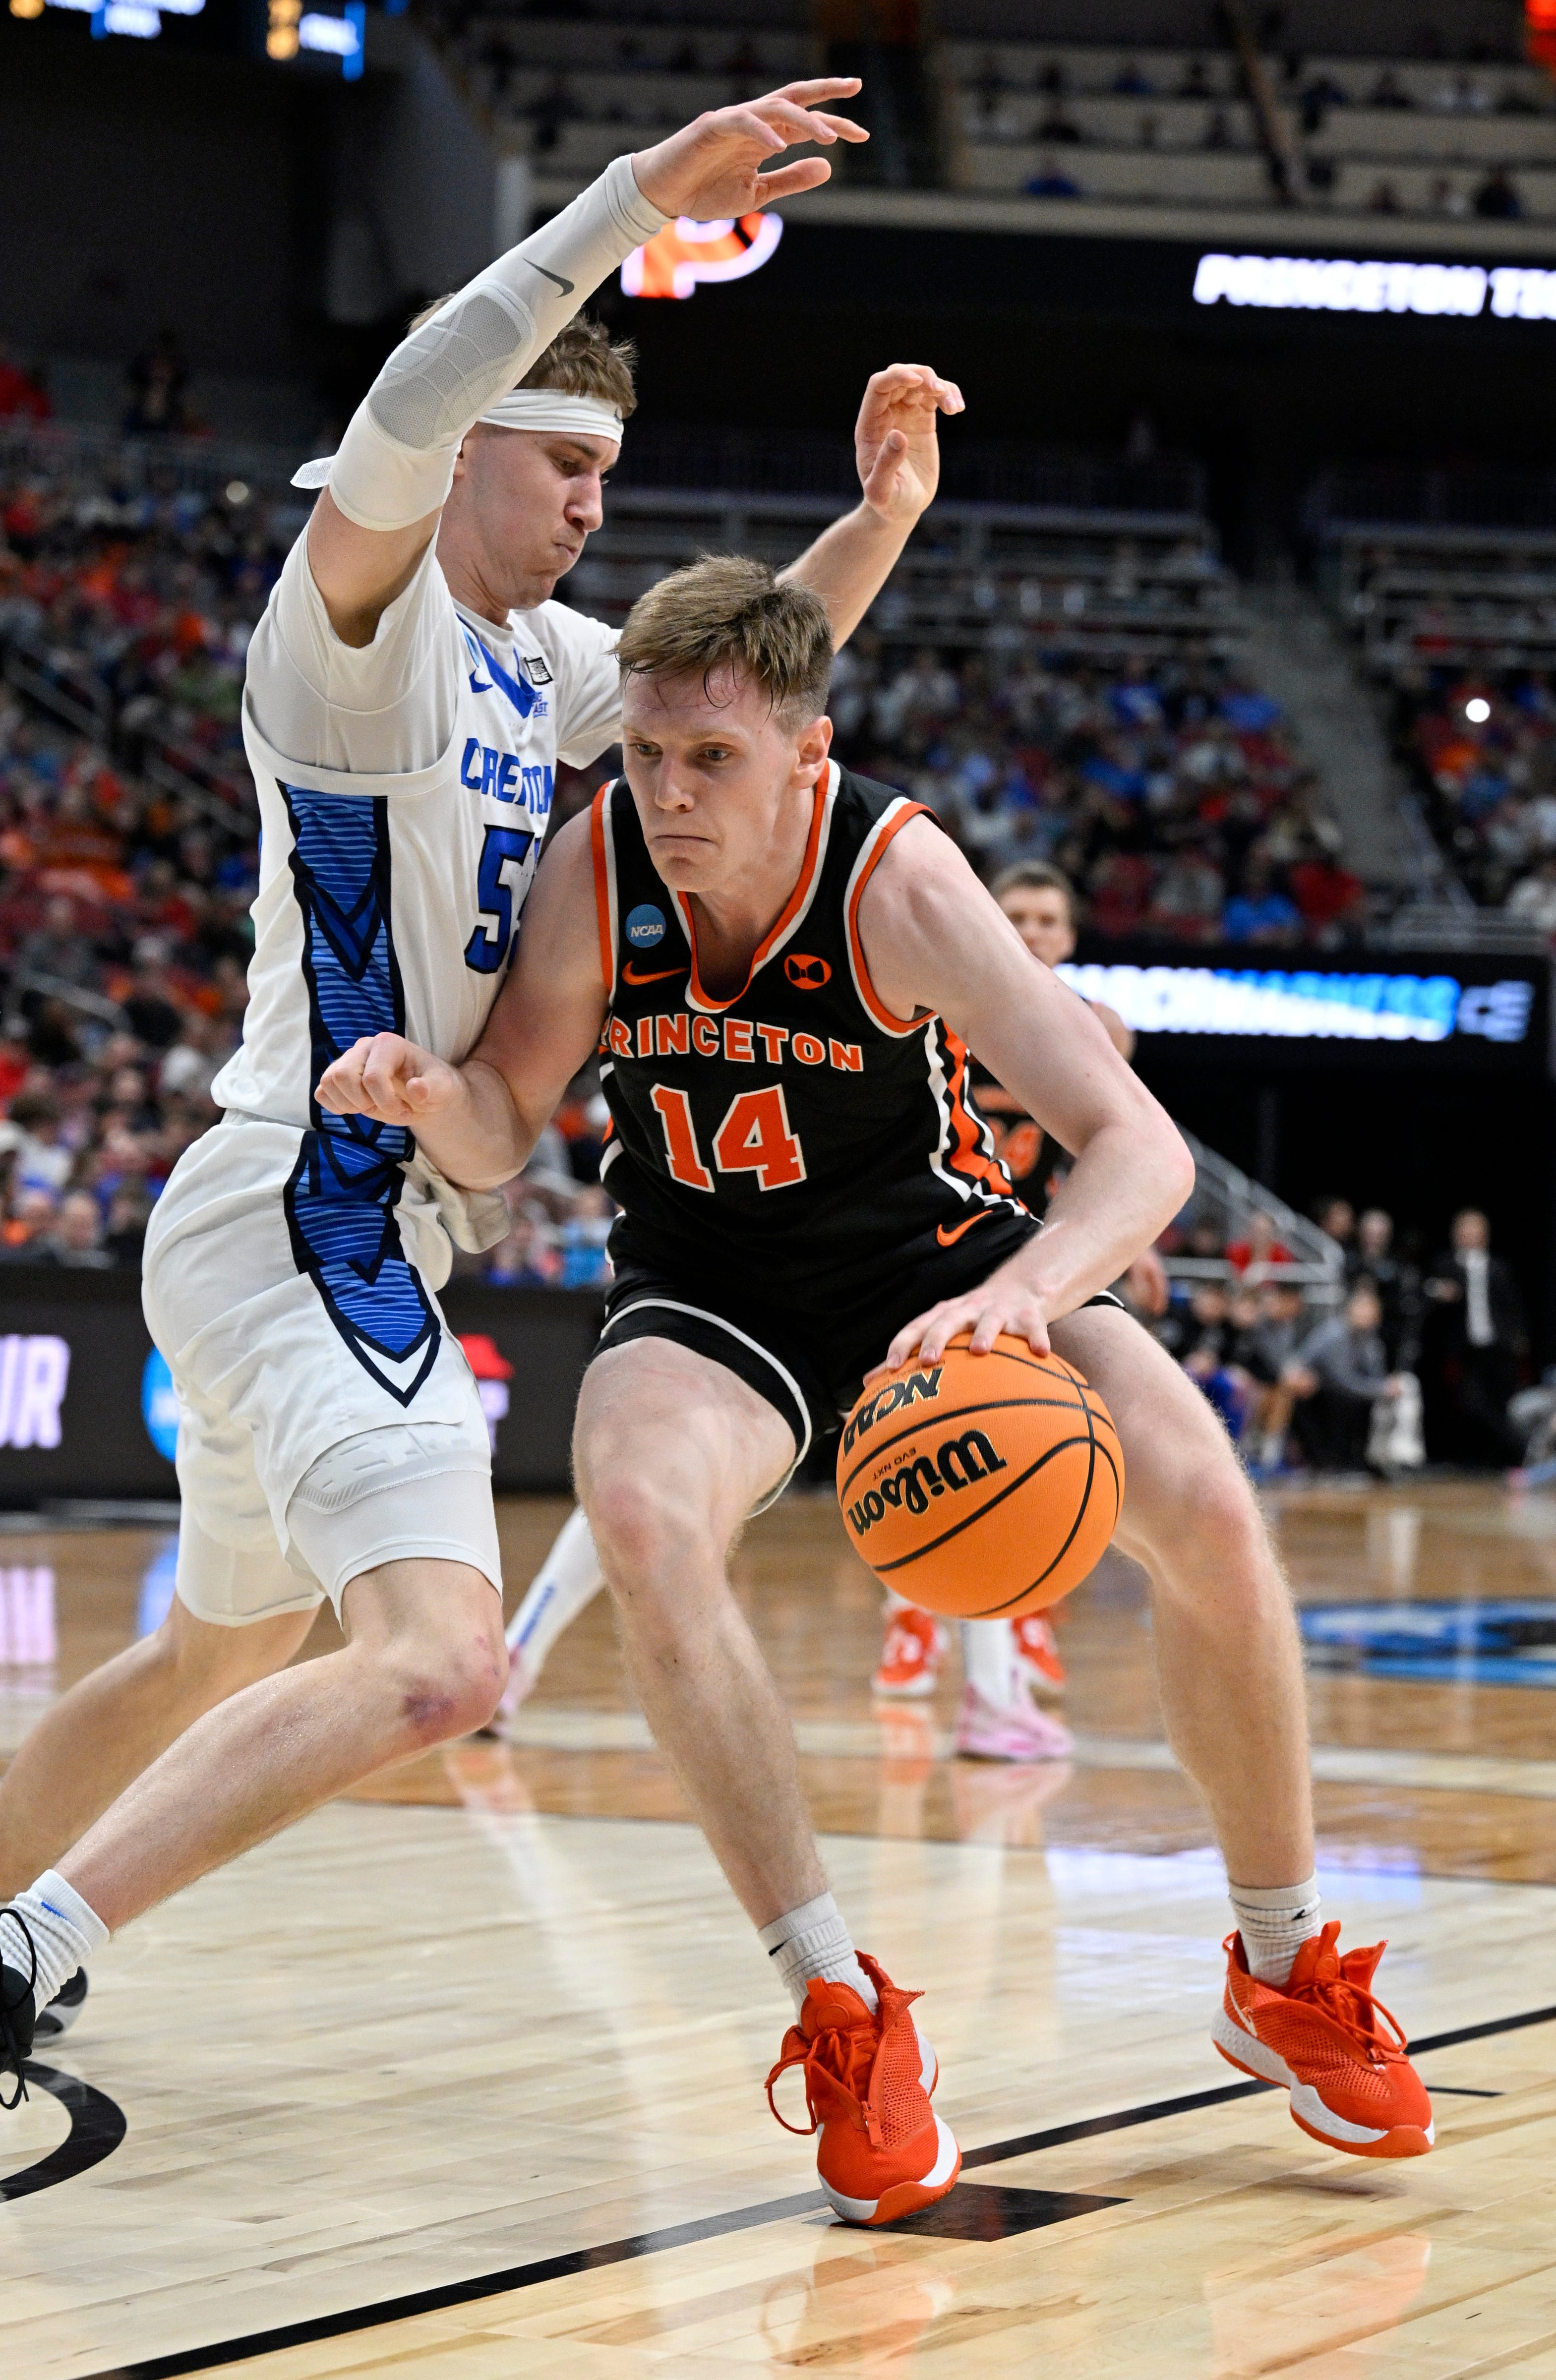 Mar 24, 2023; Louisville, KY, USA; Princeton Tigers guard Matt Allocco (14) dribbles against Creighton Bluejays guard Baylor Scheierman (55) during the second half of the NCAA tournament round of sixteen at KFC YUM! Center. Mandatory Credit: Jamie Rhodes-USA TODAY Sports